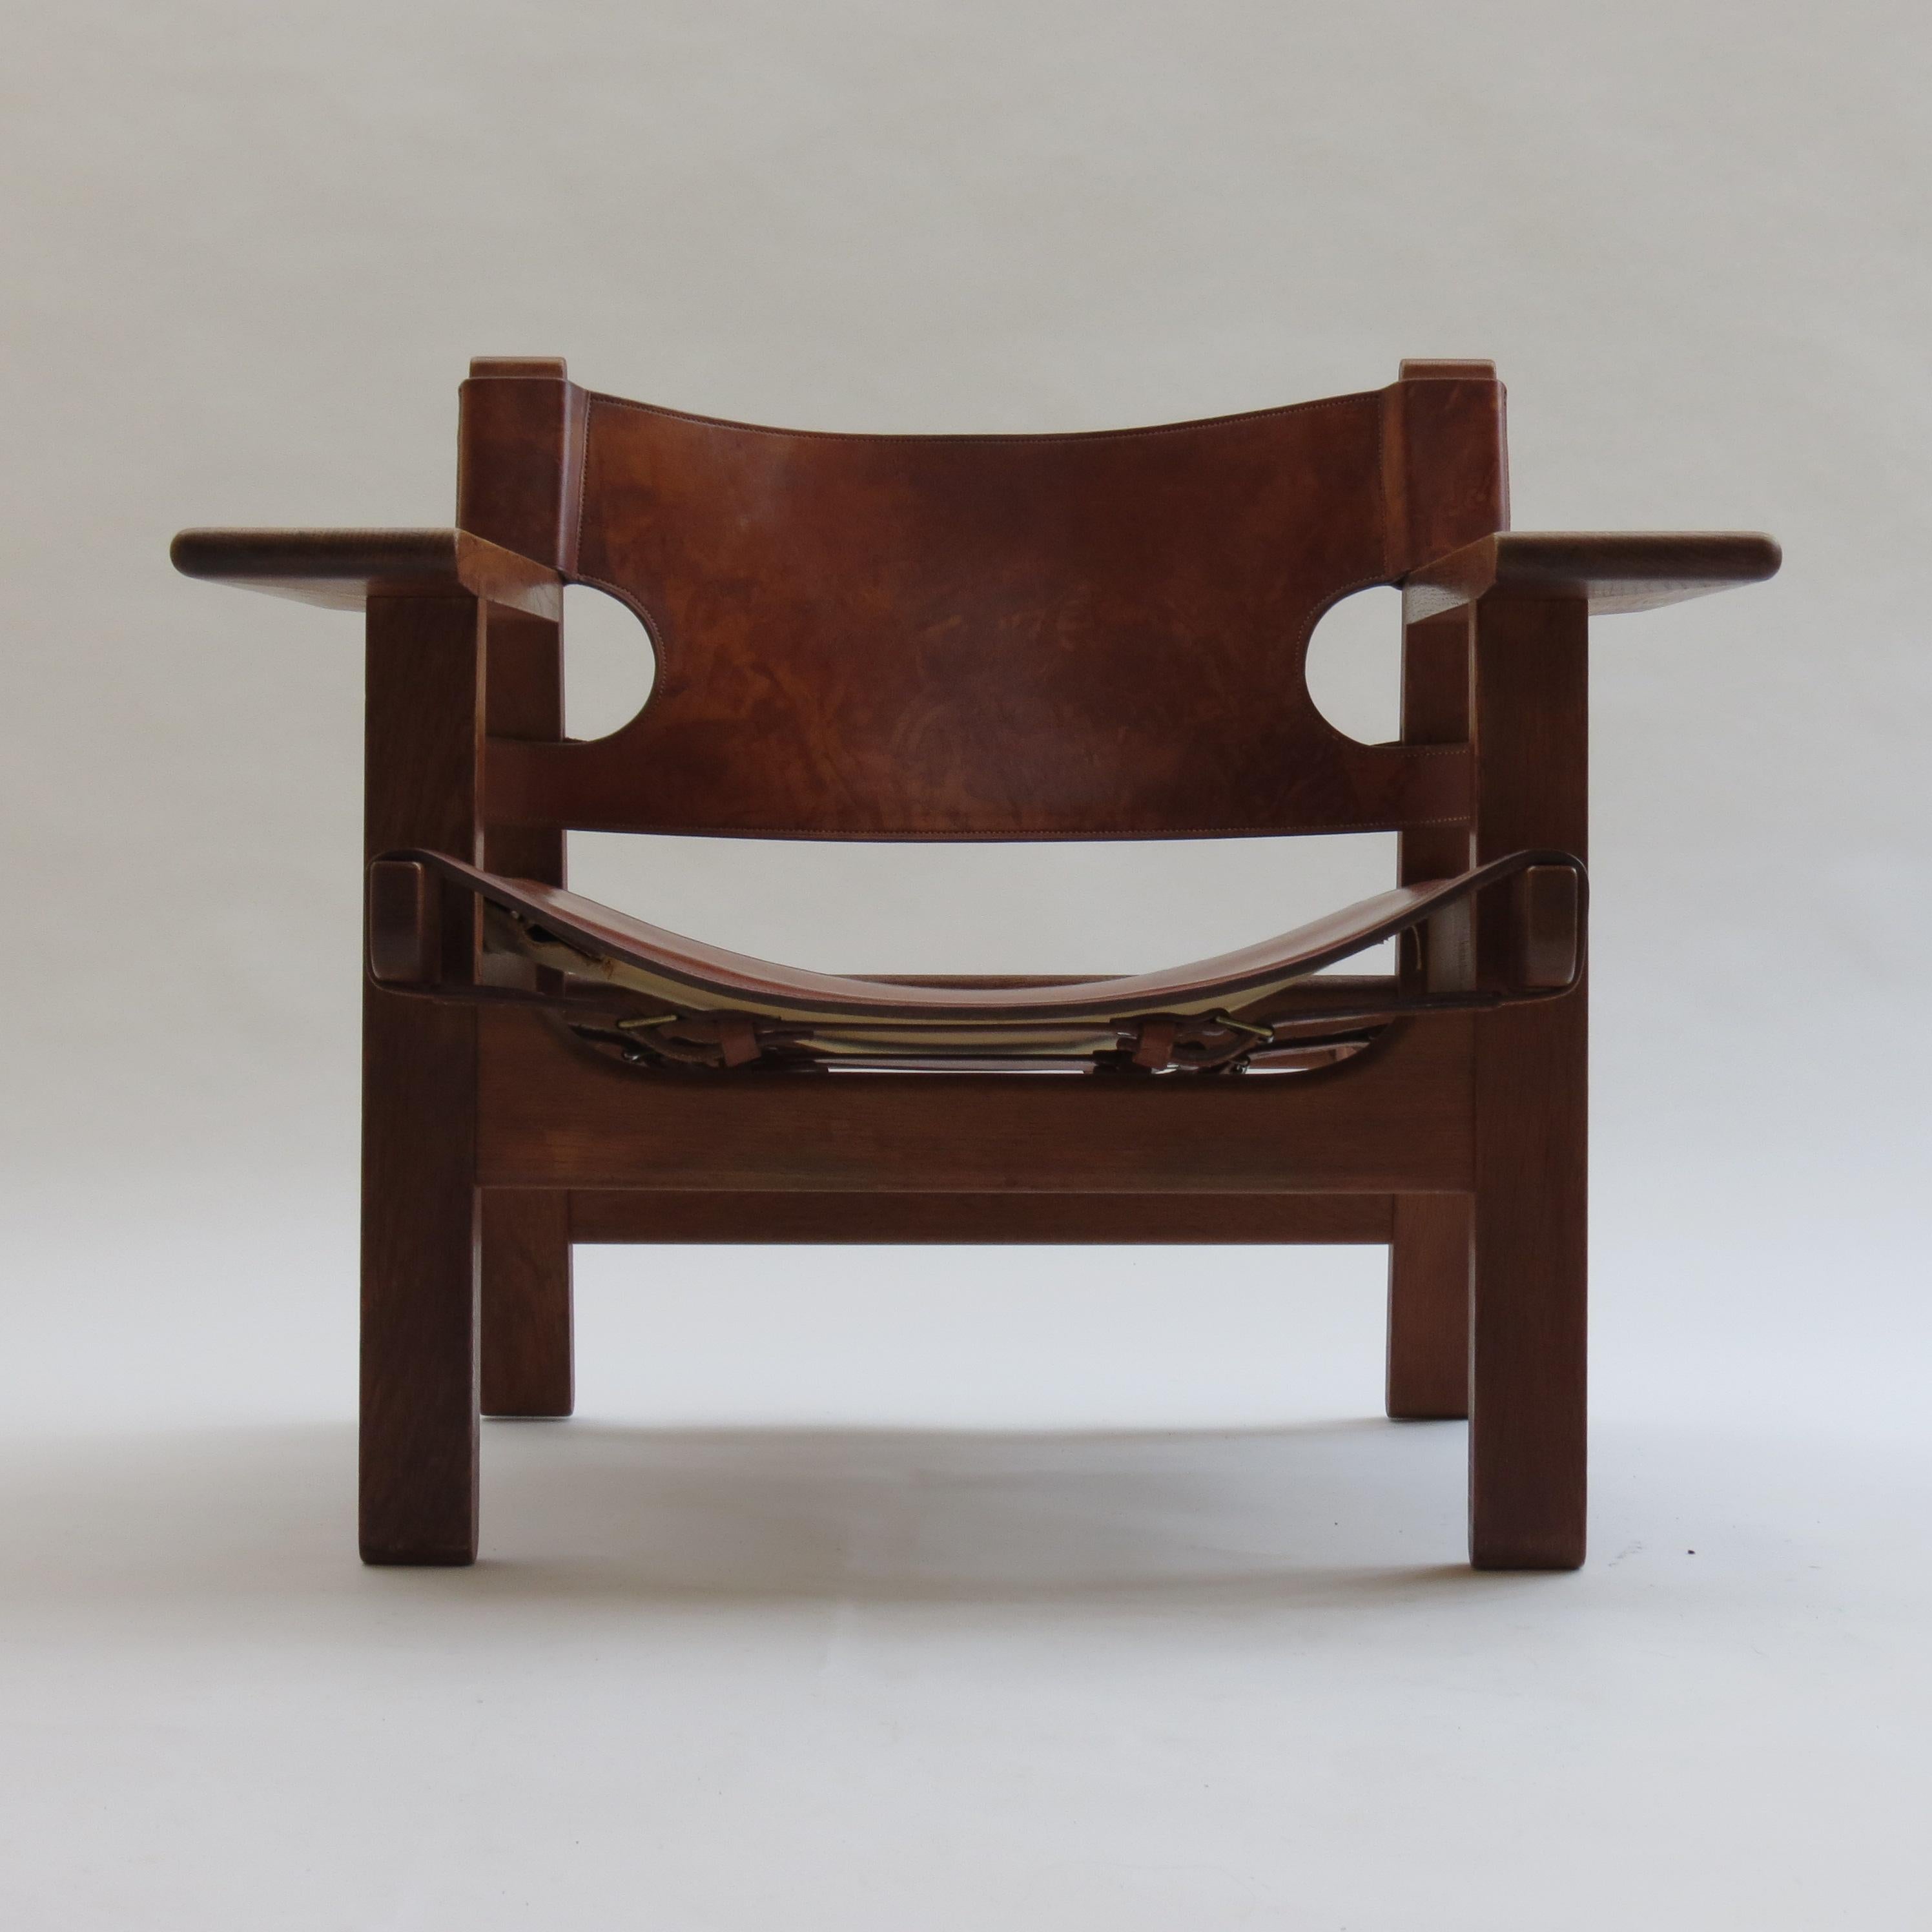 Hand-Crafted Early Original Vintage 1950s Borge Mogensen Leather and Oak Spanish Chair